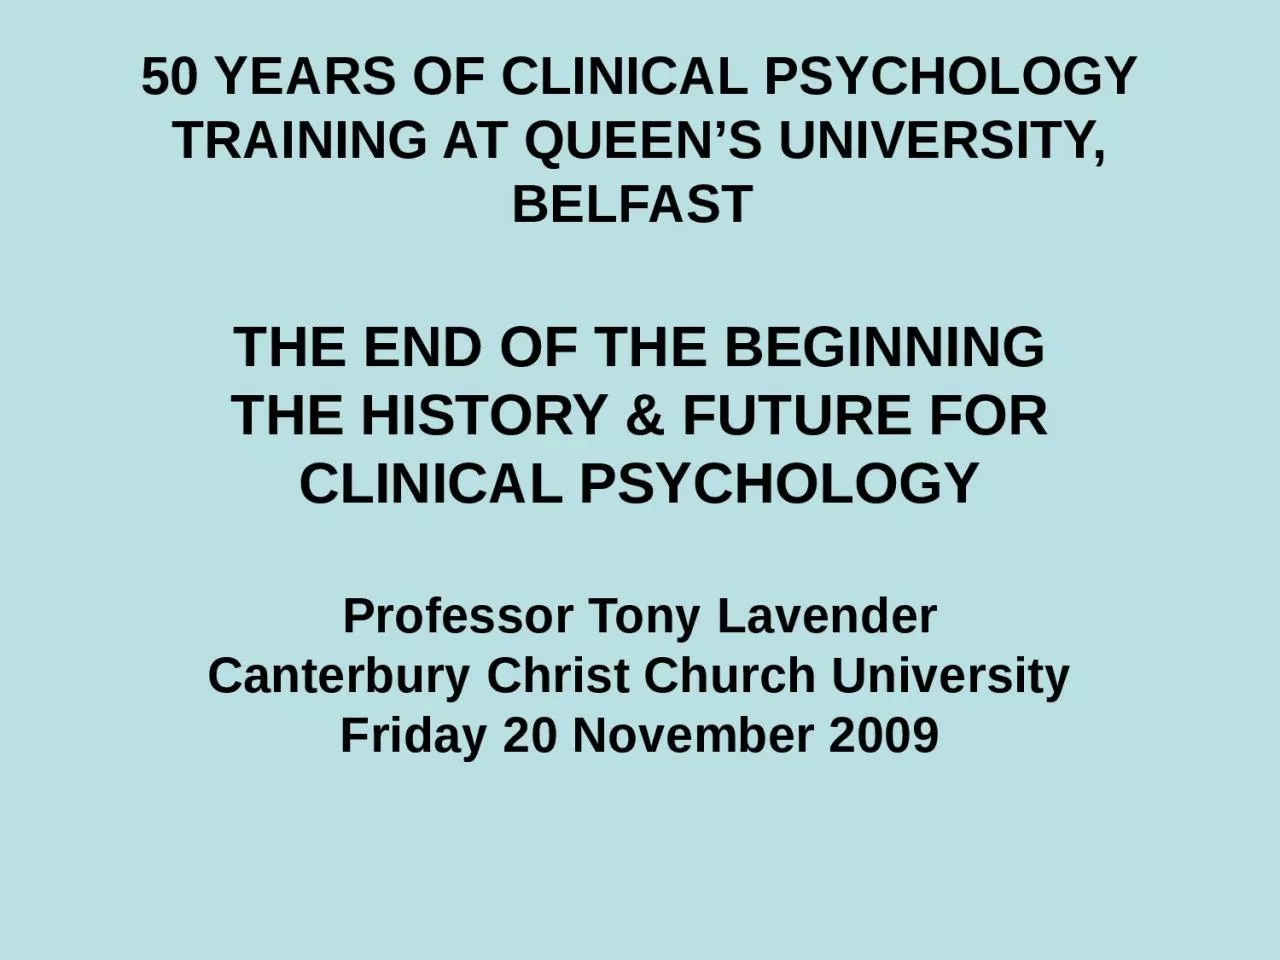 50 YEARS OF CLINICAL PSYCHOLOGY TRAINING AT QUEEN’S UNIVERSITY, BELFAST